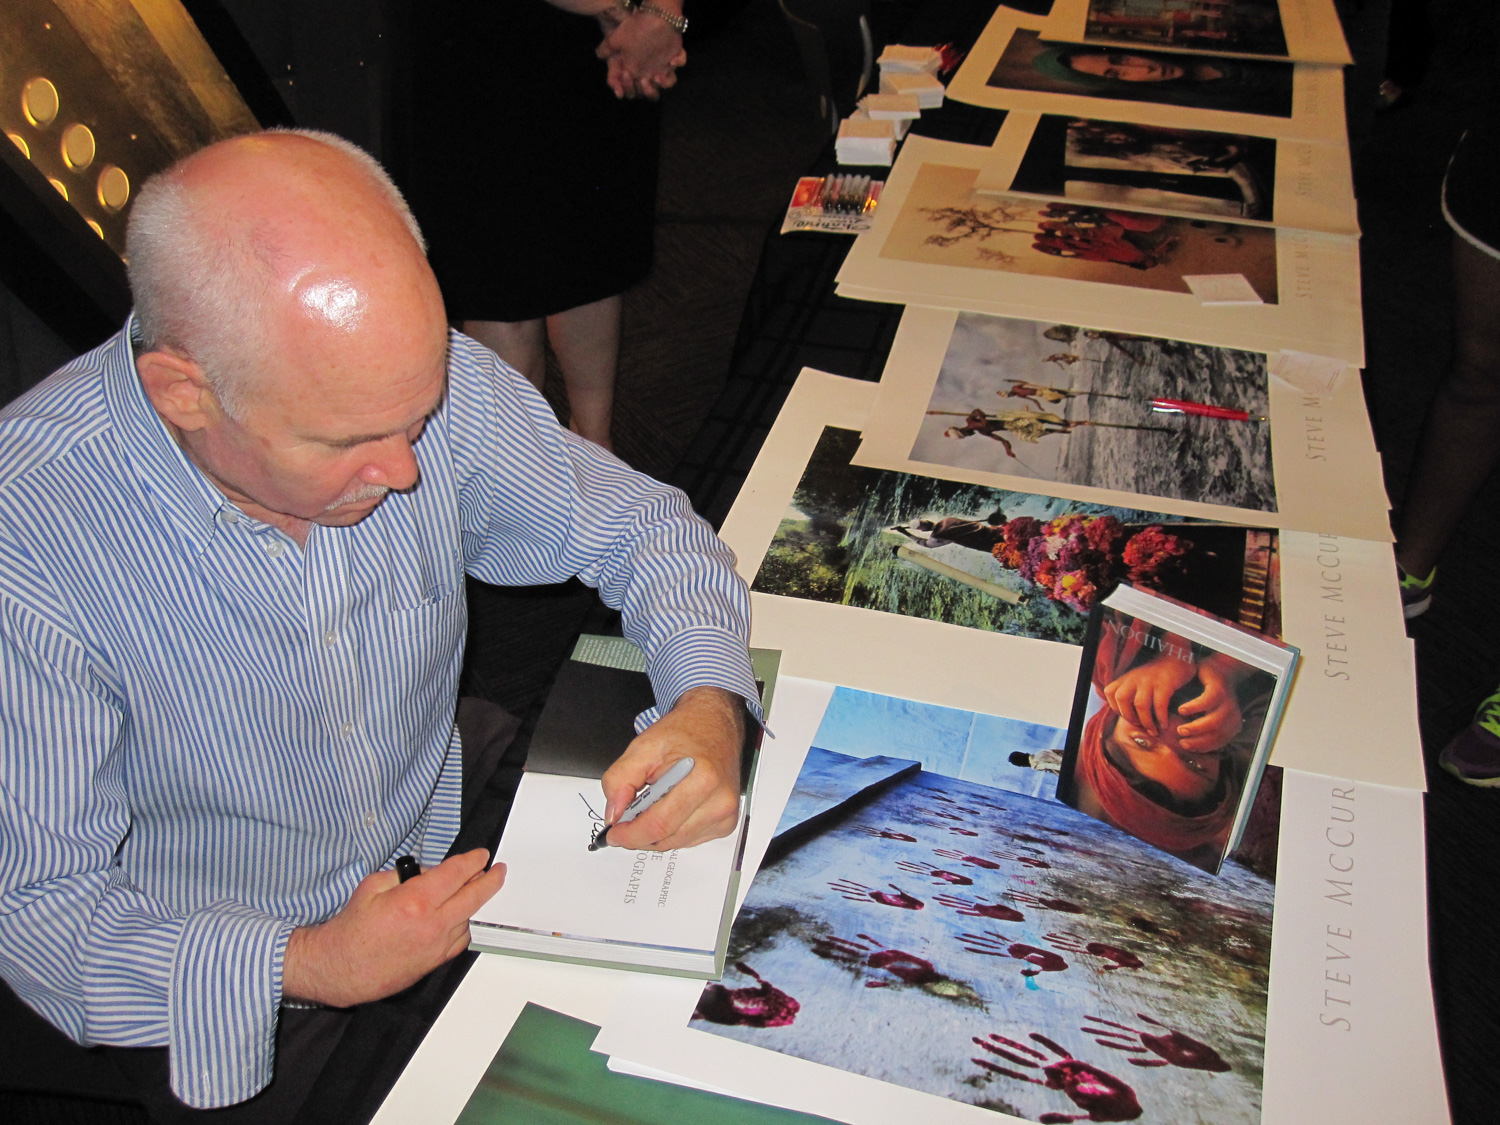 2012-09 - Steve McCurry Autographing